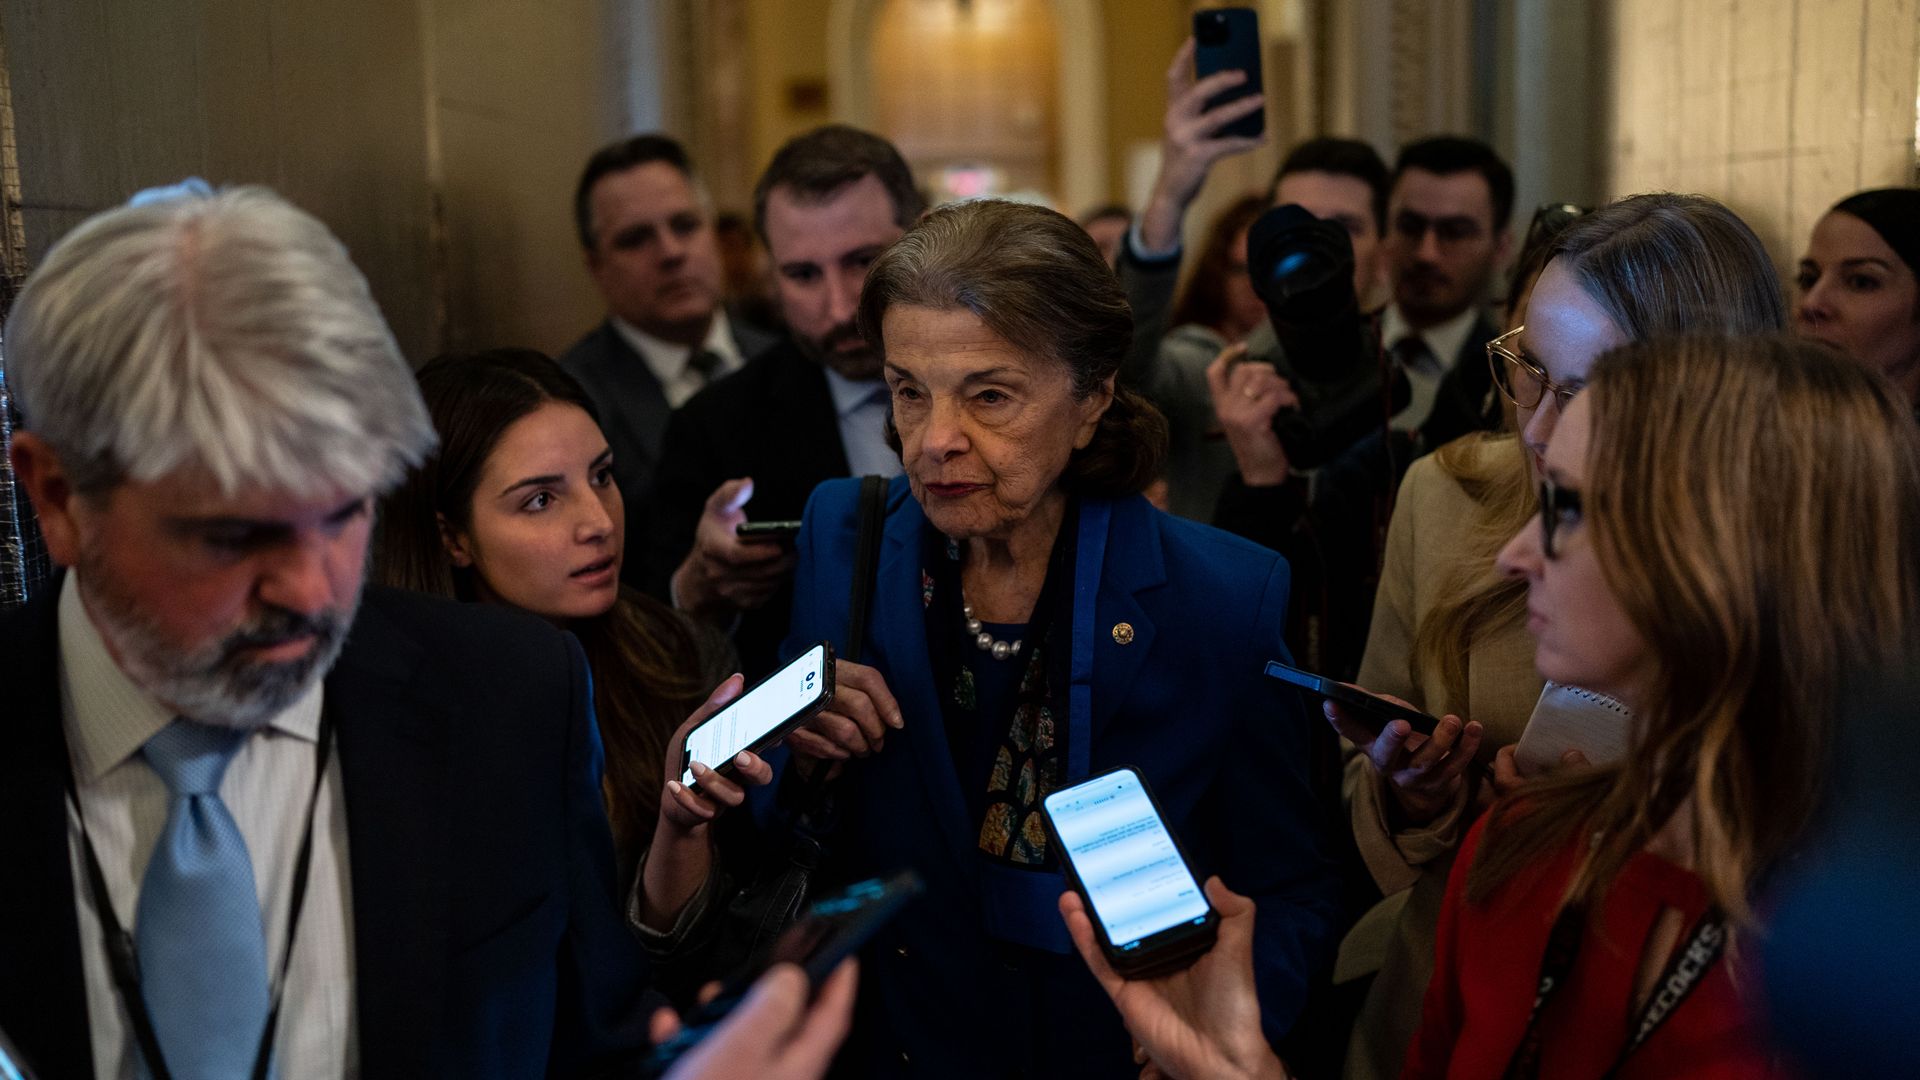 Sen. Dianne Feinstein, wearing a blue suit jacket, black shirt and pearl necklace, speaks to a throng of reporters outside the Senate chamber.